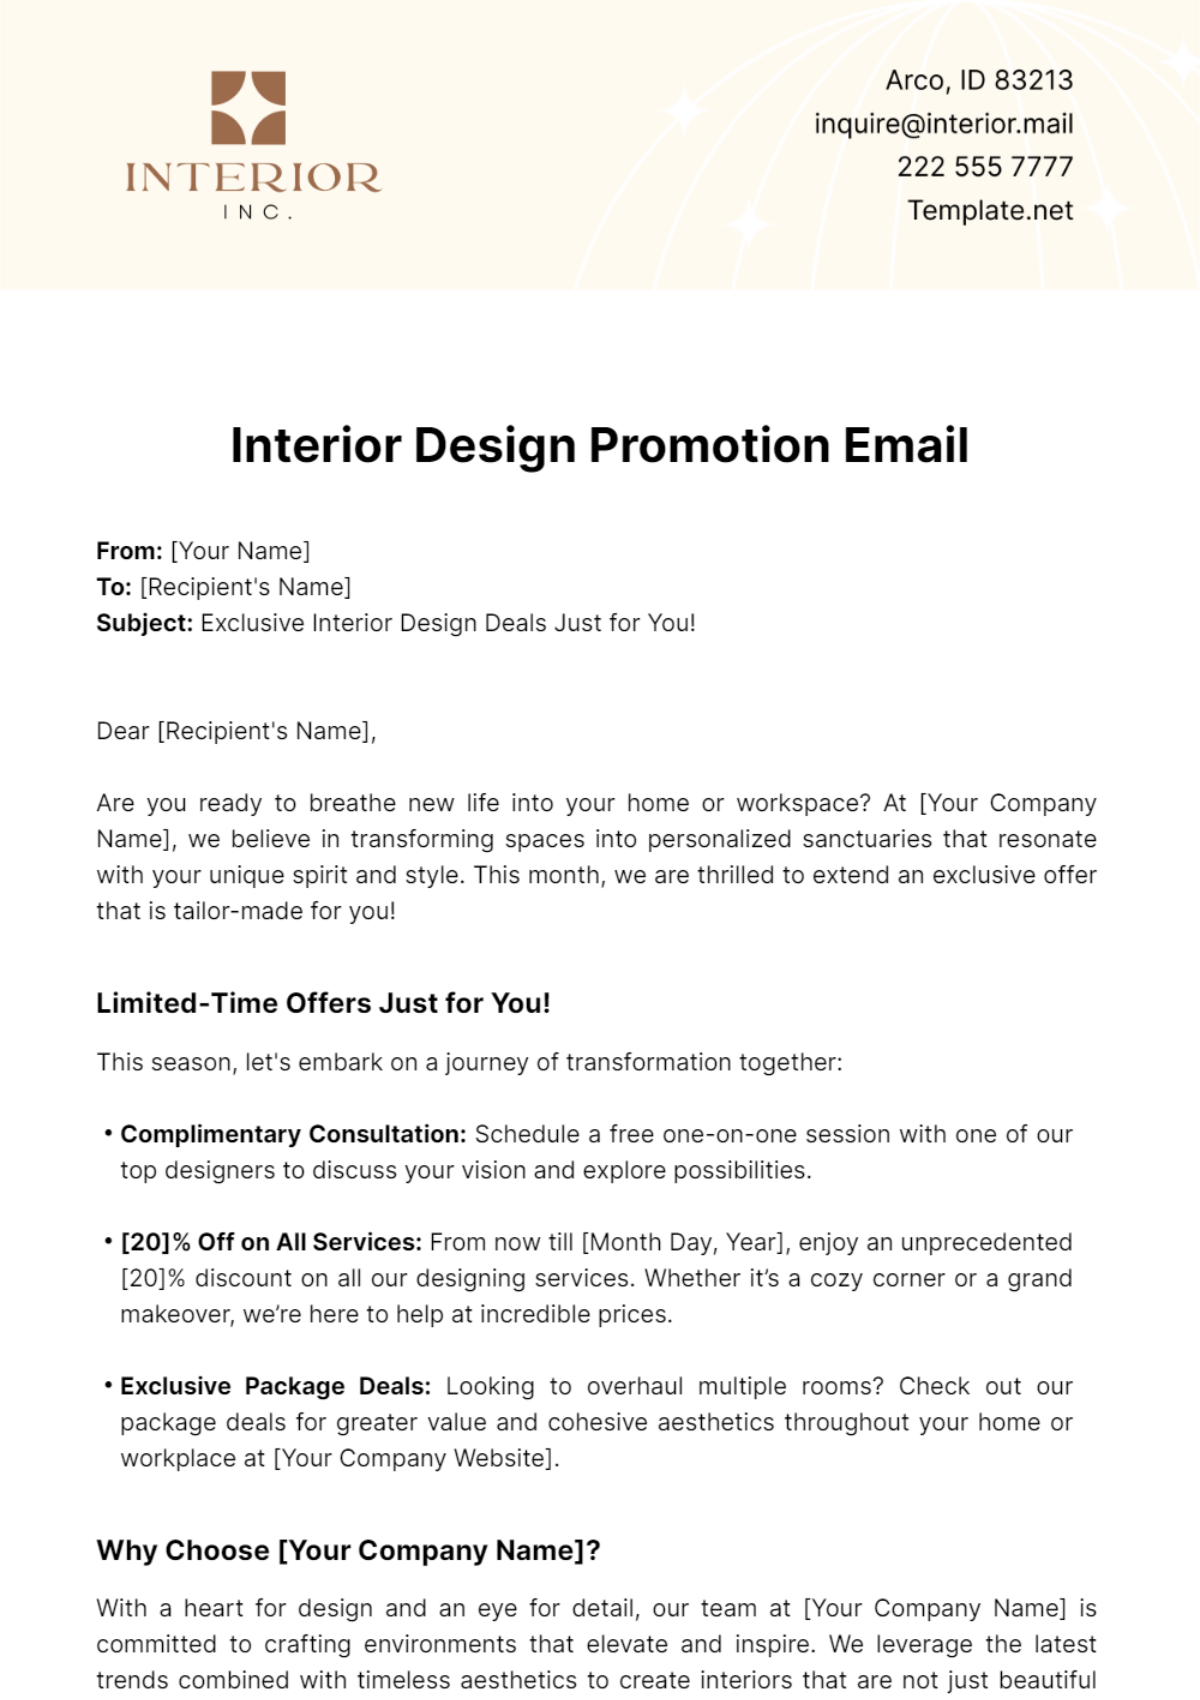 Free Interior Design Promotion Email Template